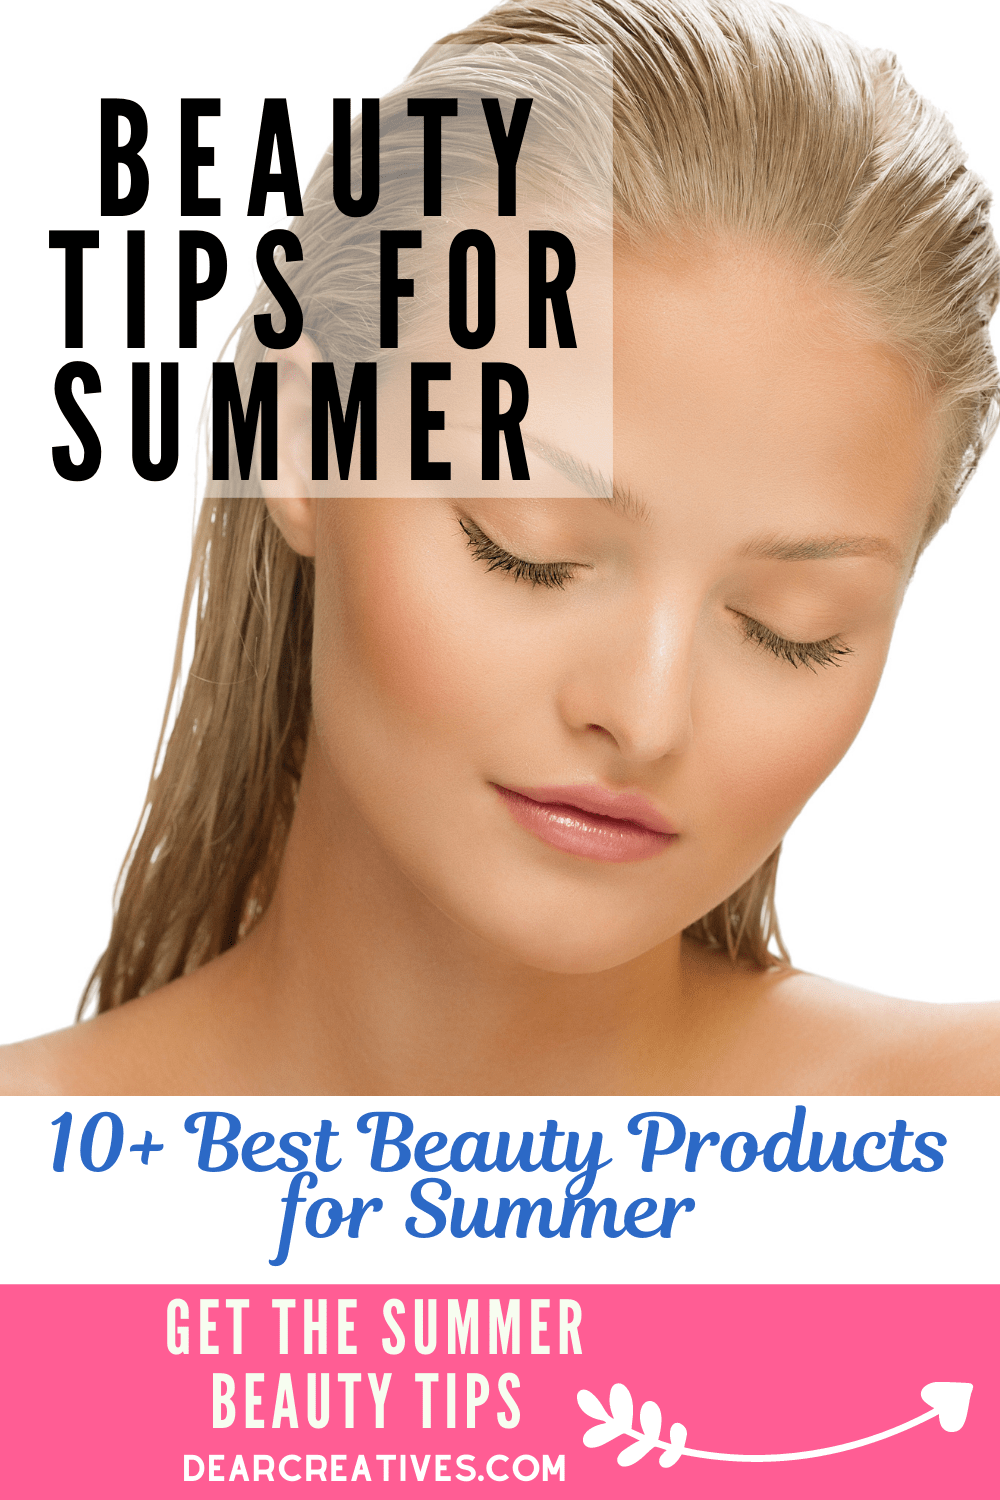 Beauty Tips For Summer +10 Beauty Products